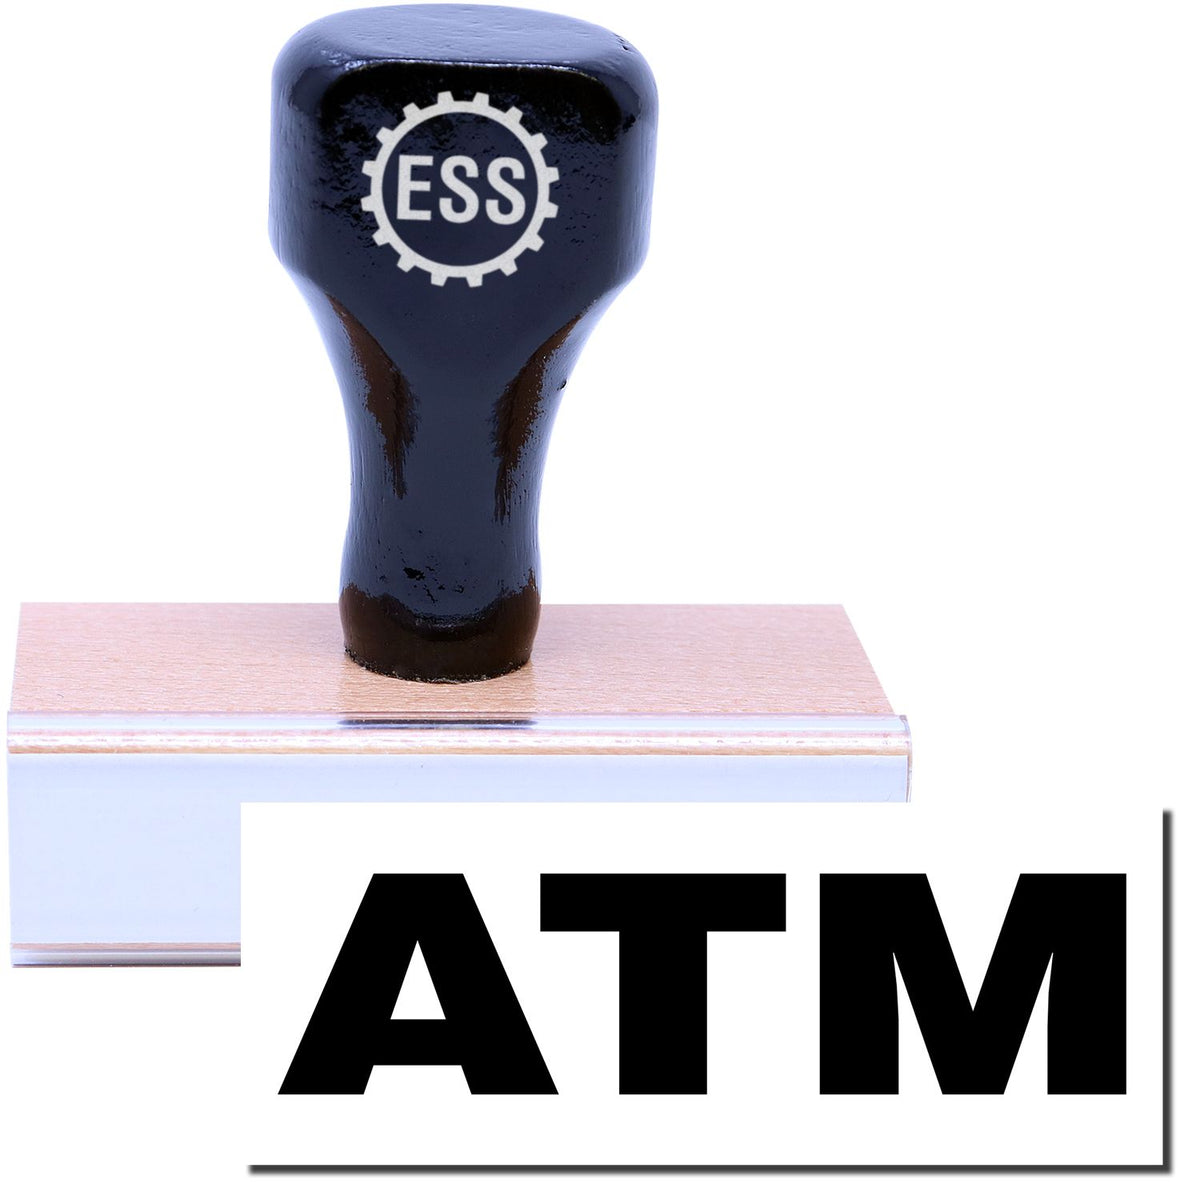 A stock office rubber stamp with a stamped image showing how the text &quot;ATM&quot; is displayed after stamping.